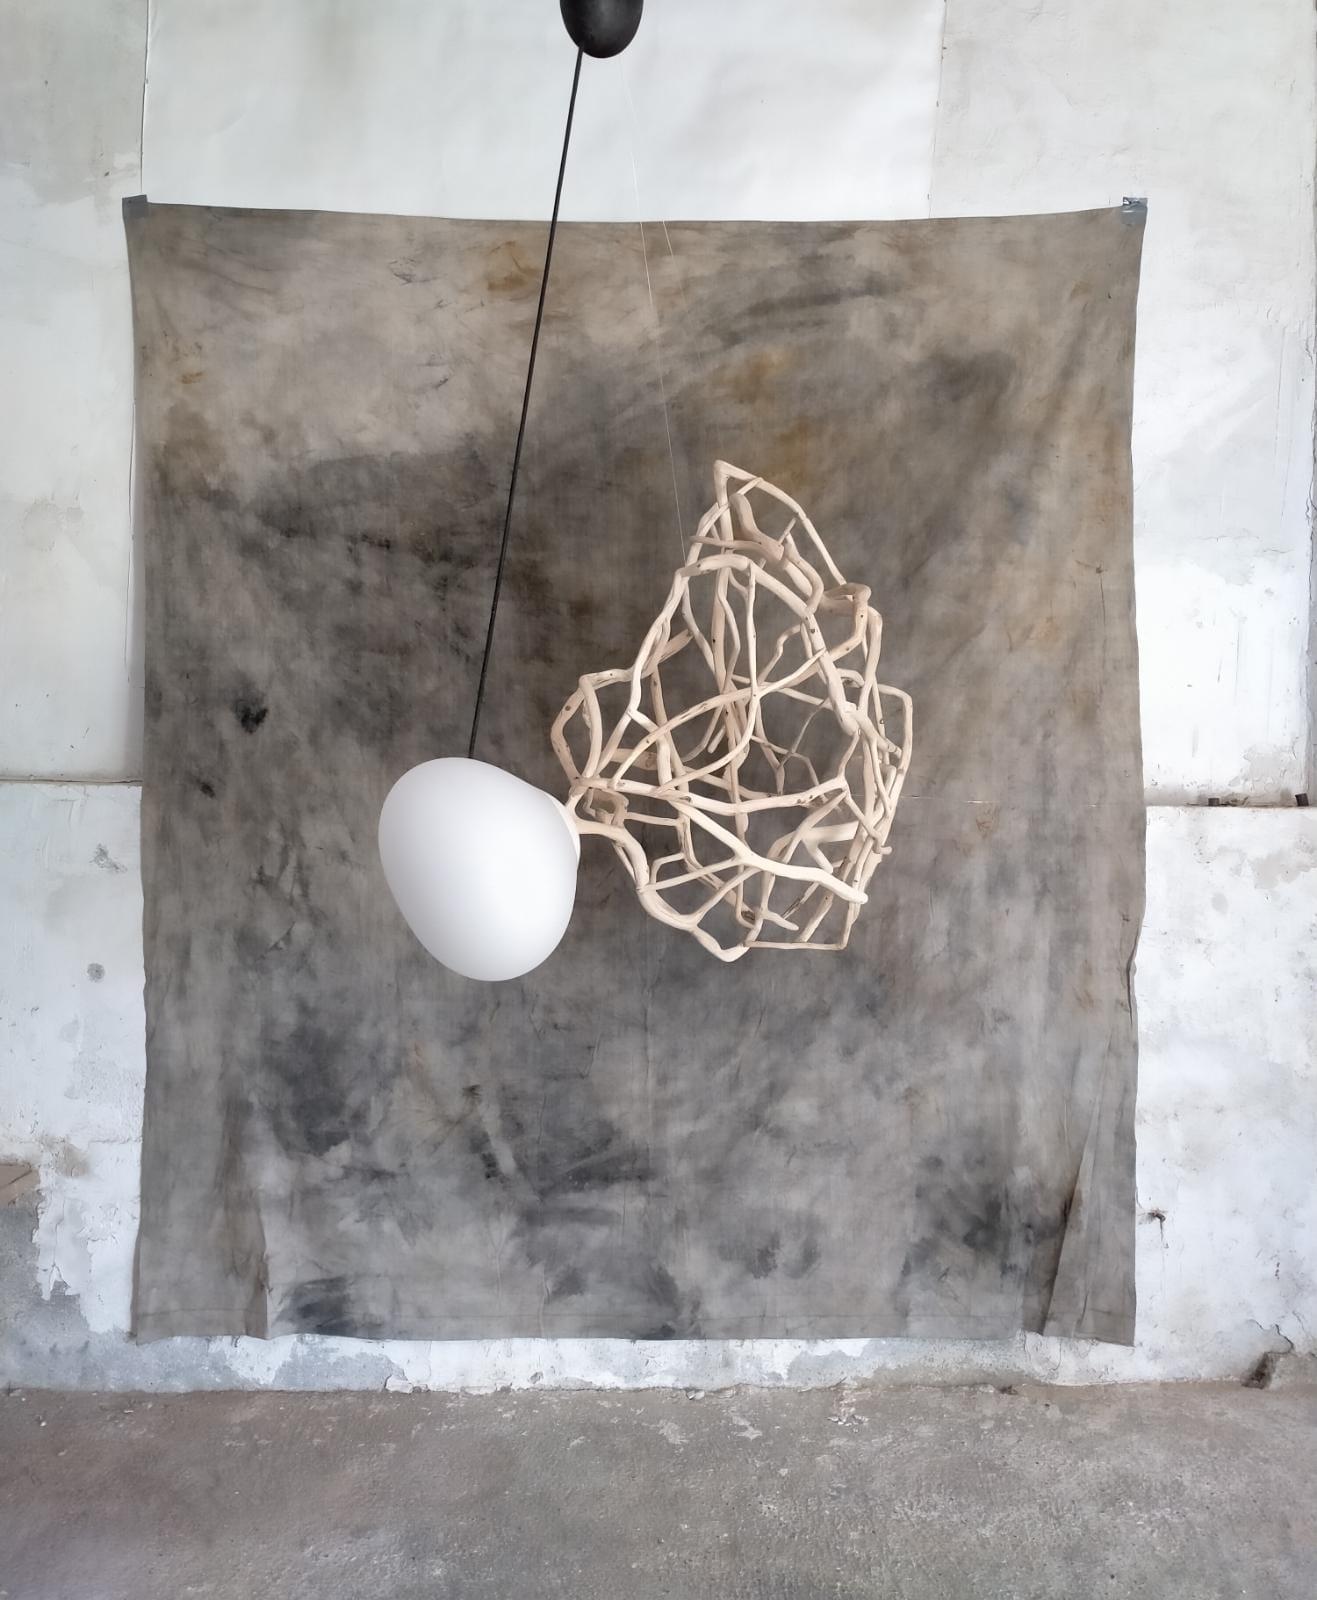 French Planck Marseille Sculpted Lighting Pendant by Jérôme Pereira For Sale